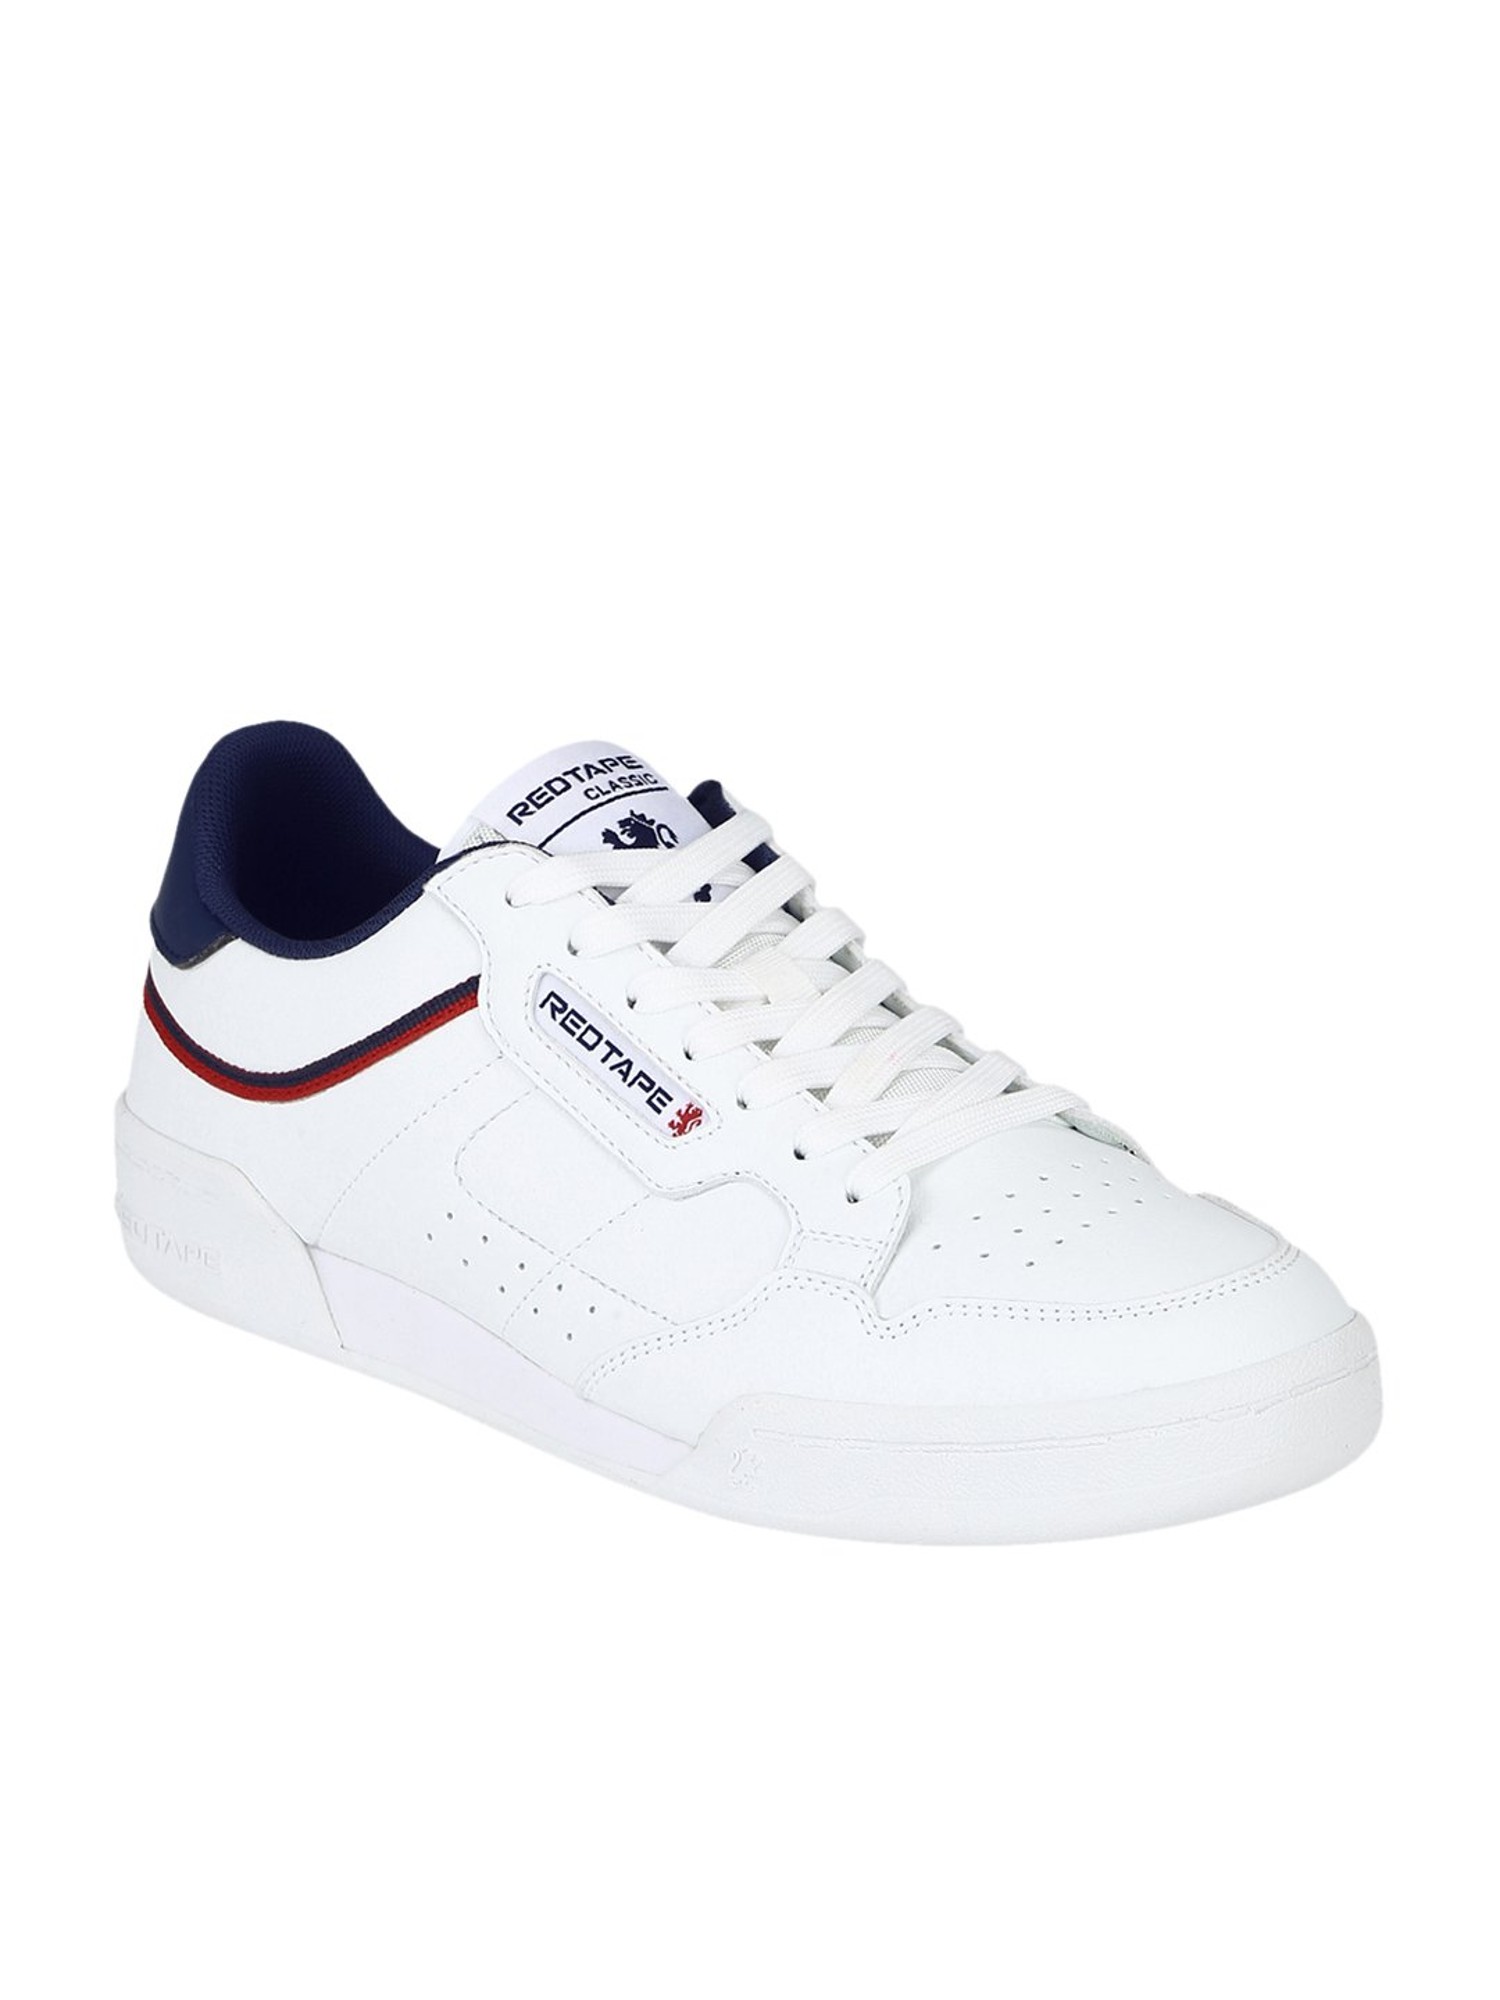 Buy Red Tape White Casual Sneakers for 